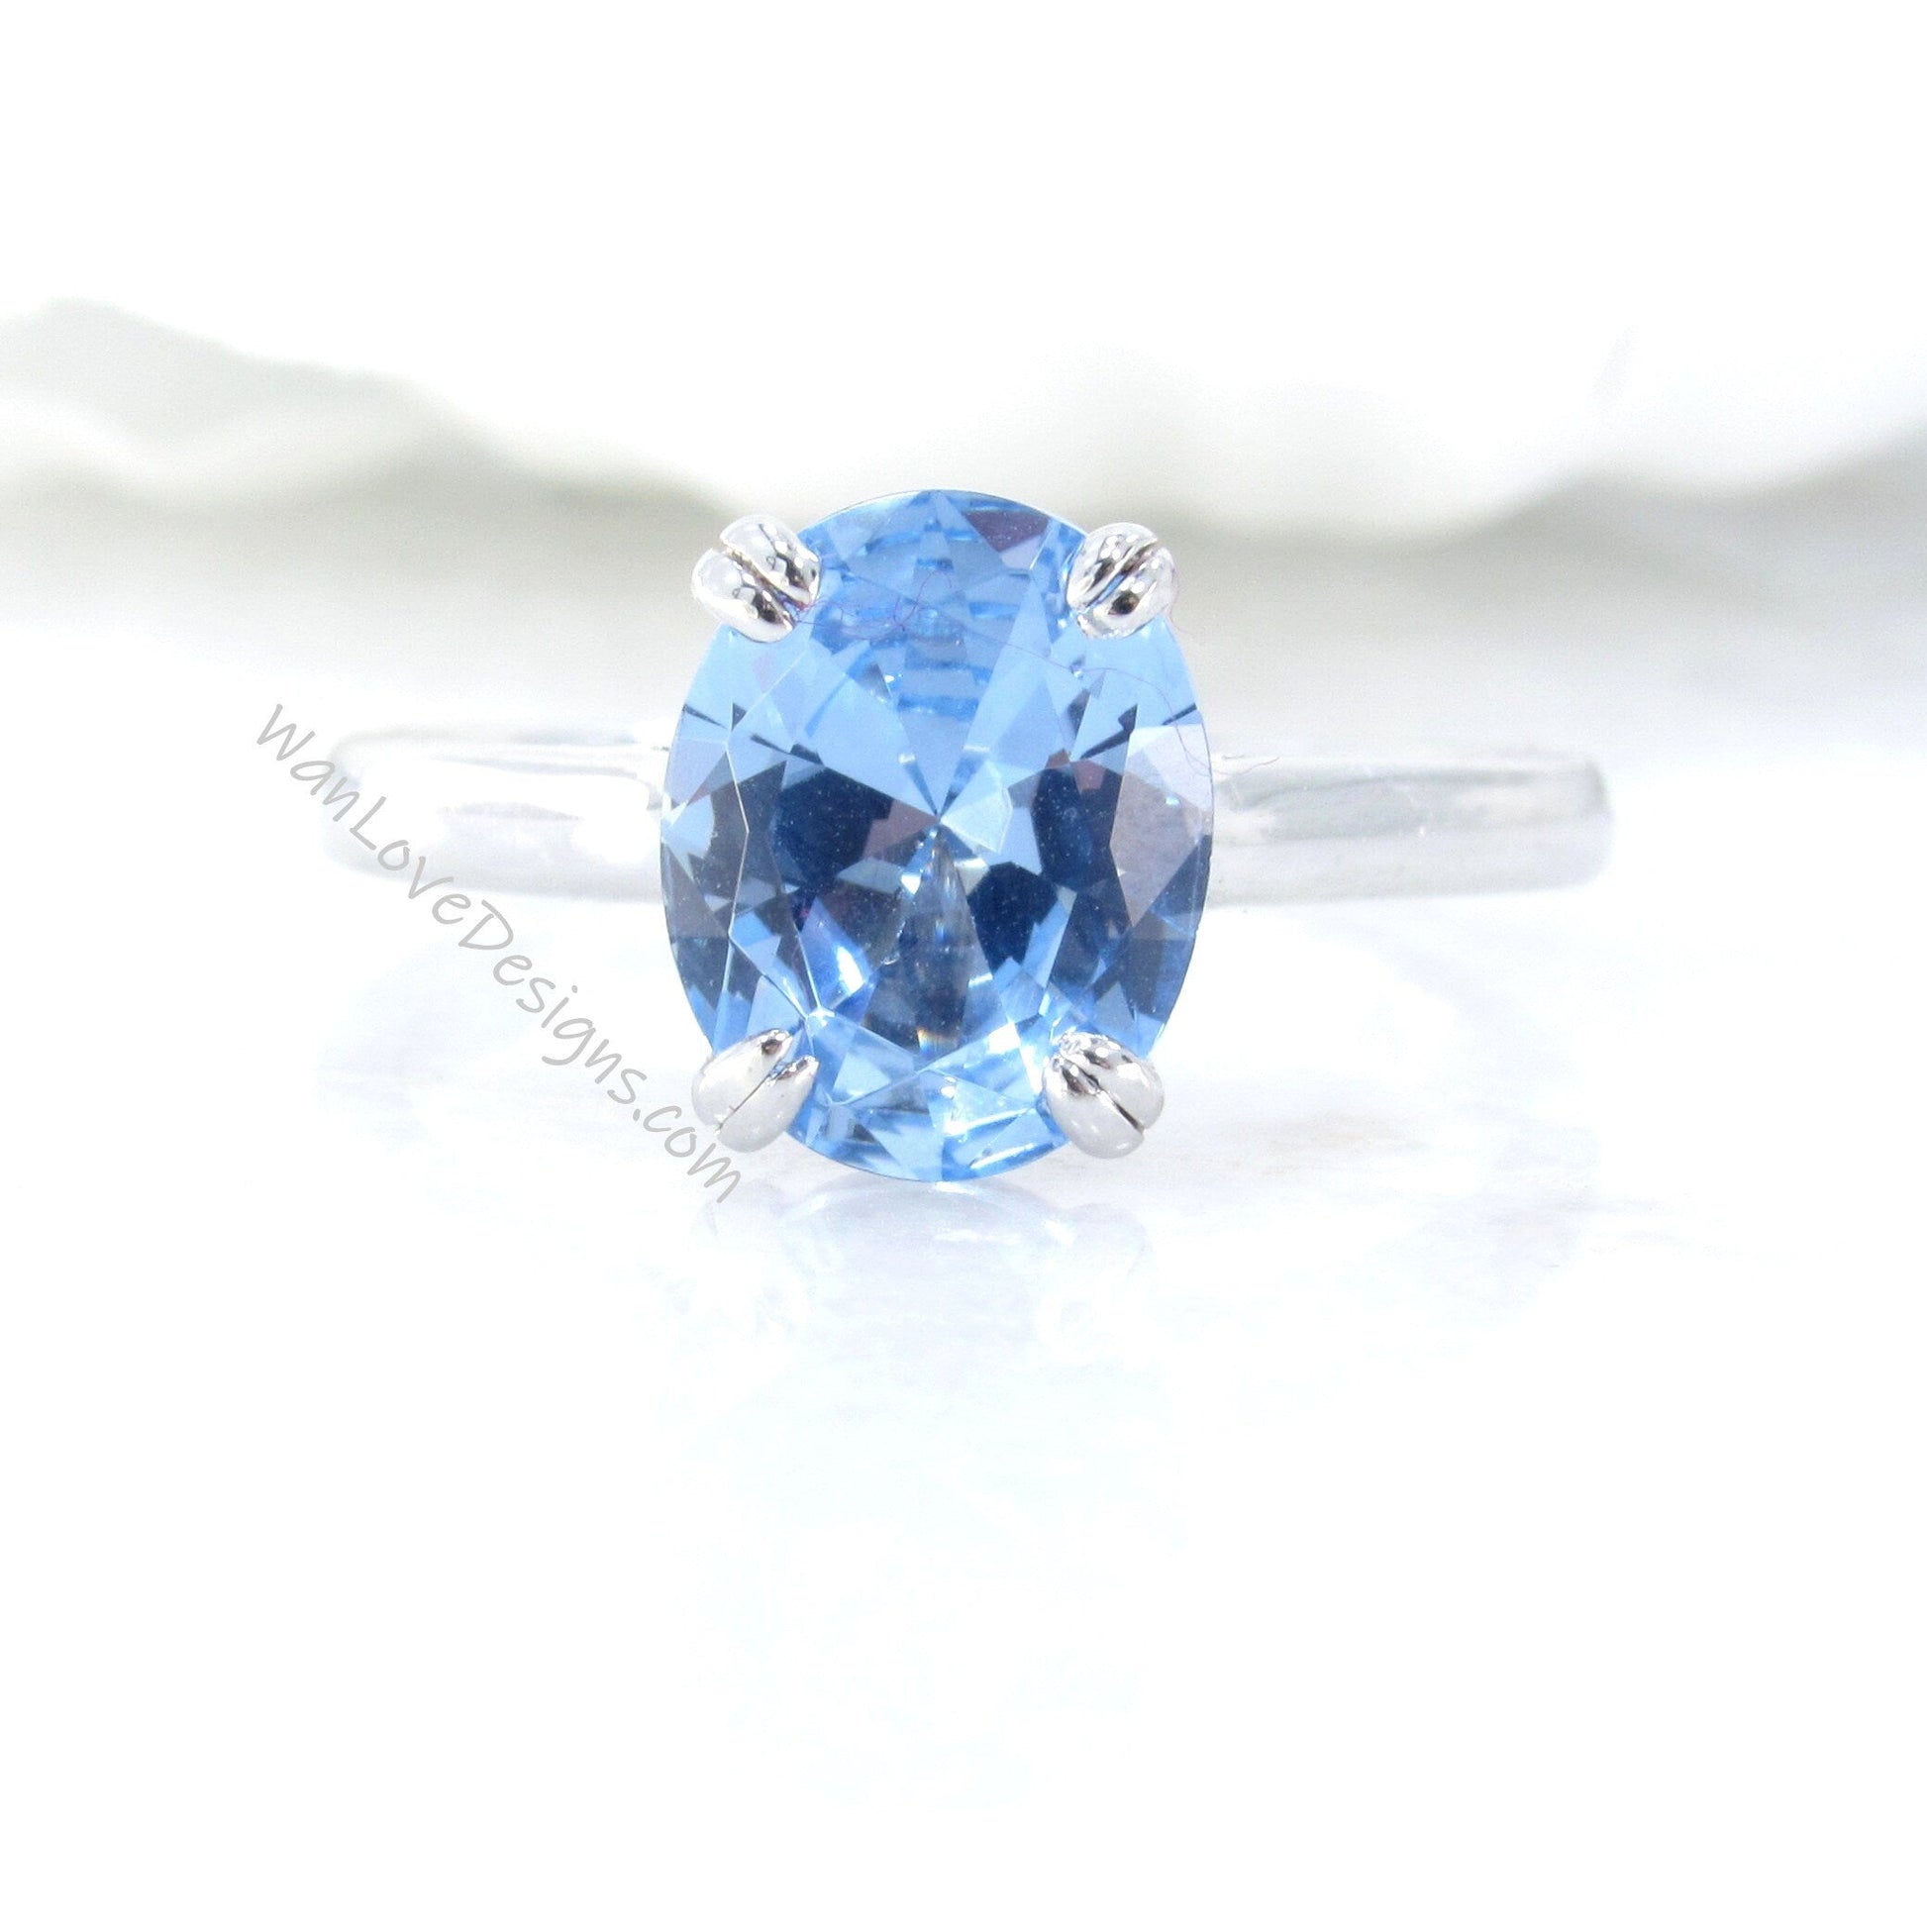 Aquamarine Spinel Solitaire Oval Engagement Ring 4ct 10x8mm 925 Silver w Rhodium-Custom-Wedding-Anniversary-Cathedral-Ready to Ship Wan Love Designs